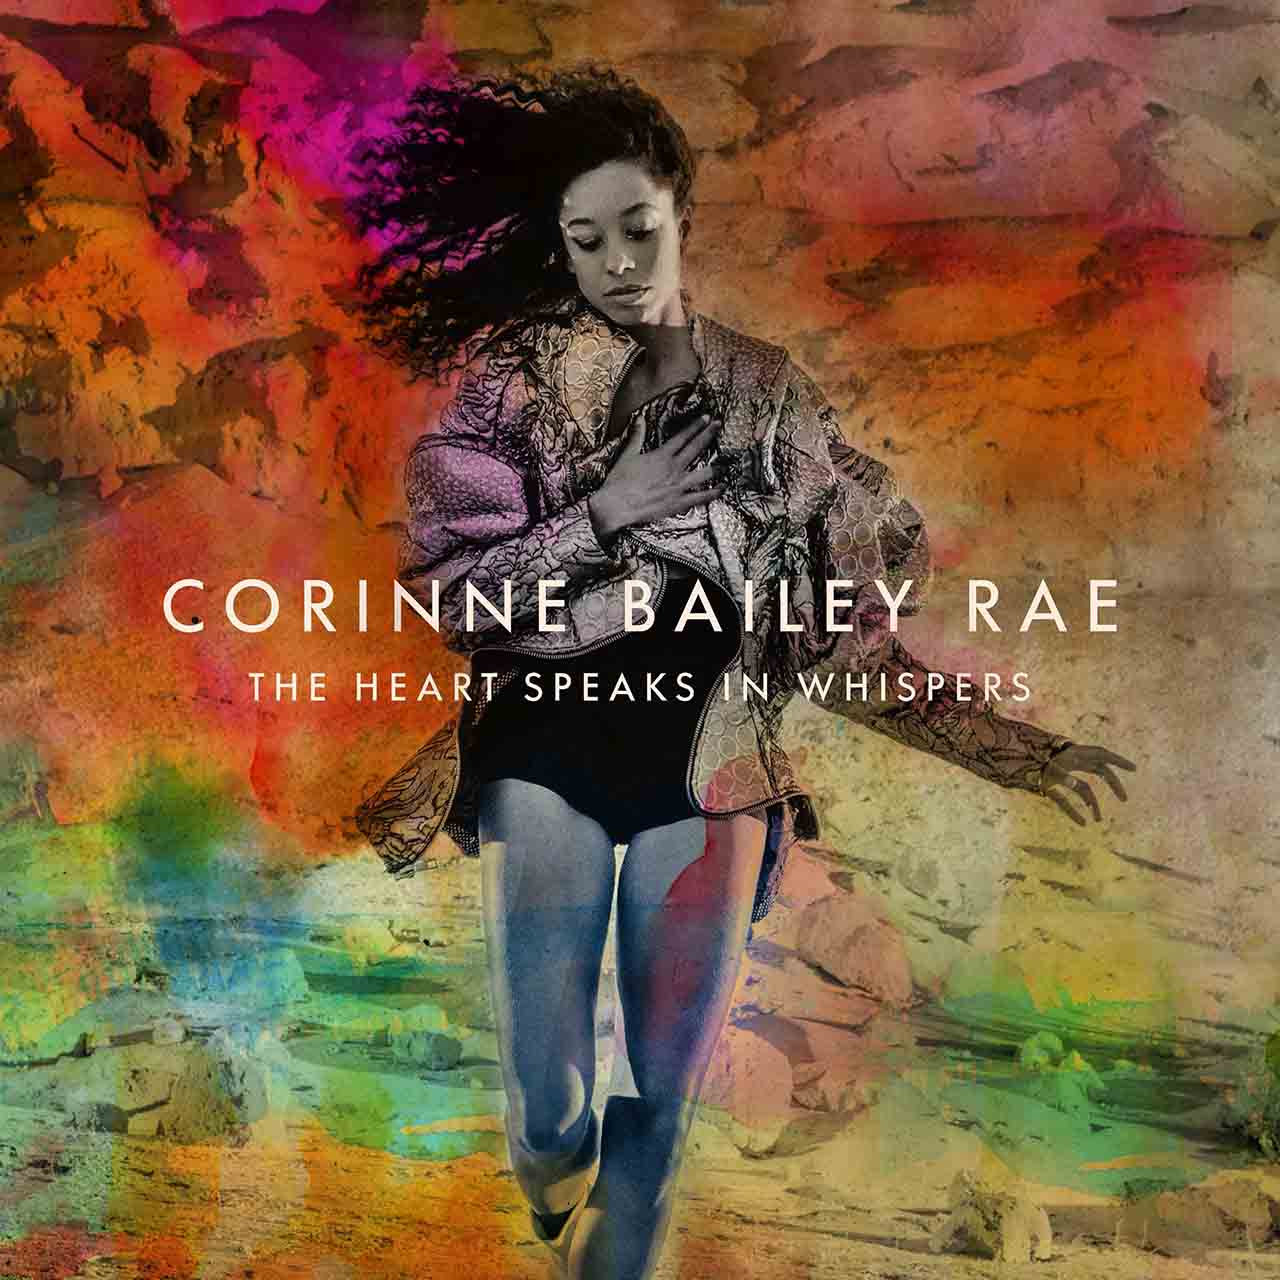 ‘Do You Ever Think of Me?’: Corinne Bailey Rae’s Standout Ballad